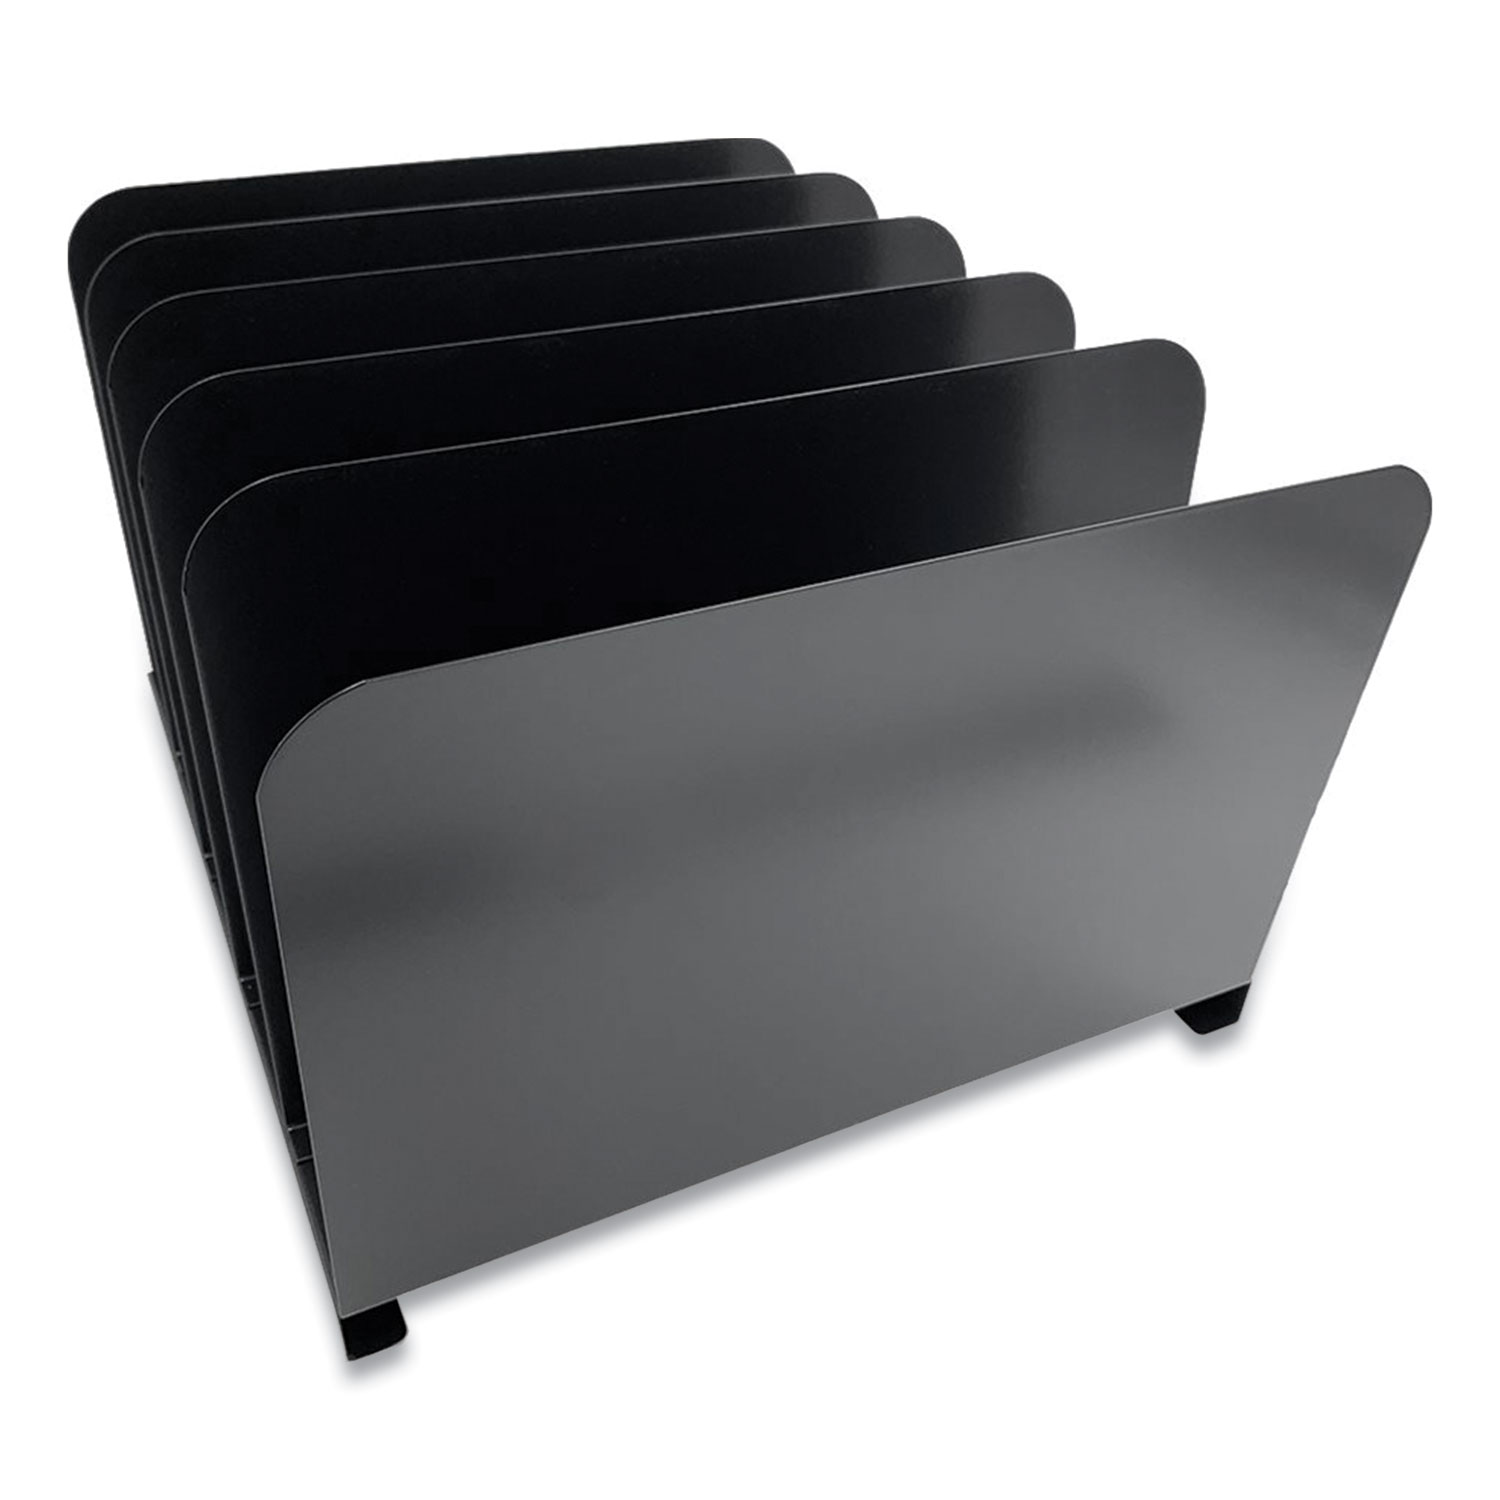 Huron Steel Vertical File Organizer, 5 Sections, Letter Size Files, 11 x 12.5 x 7.75, Black